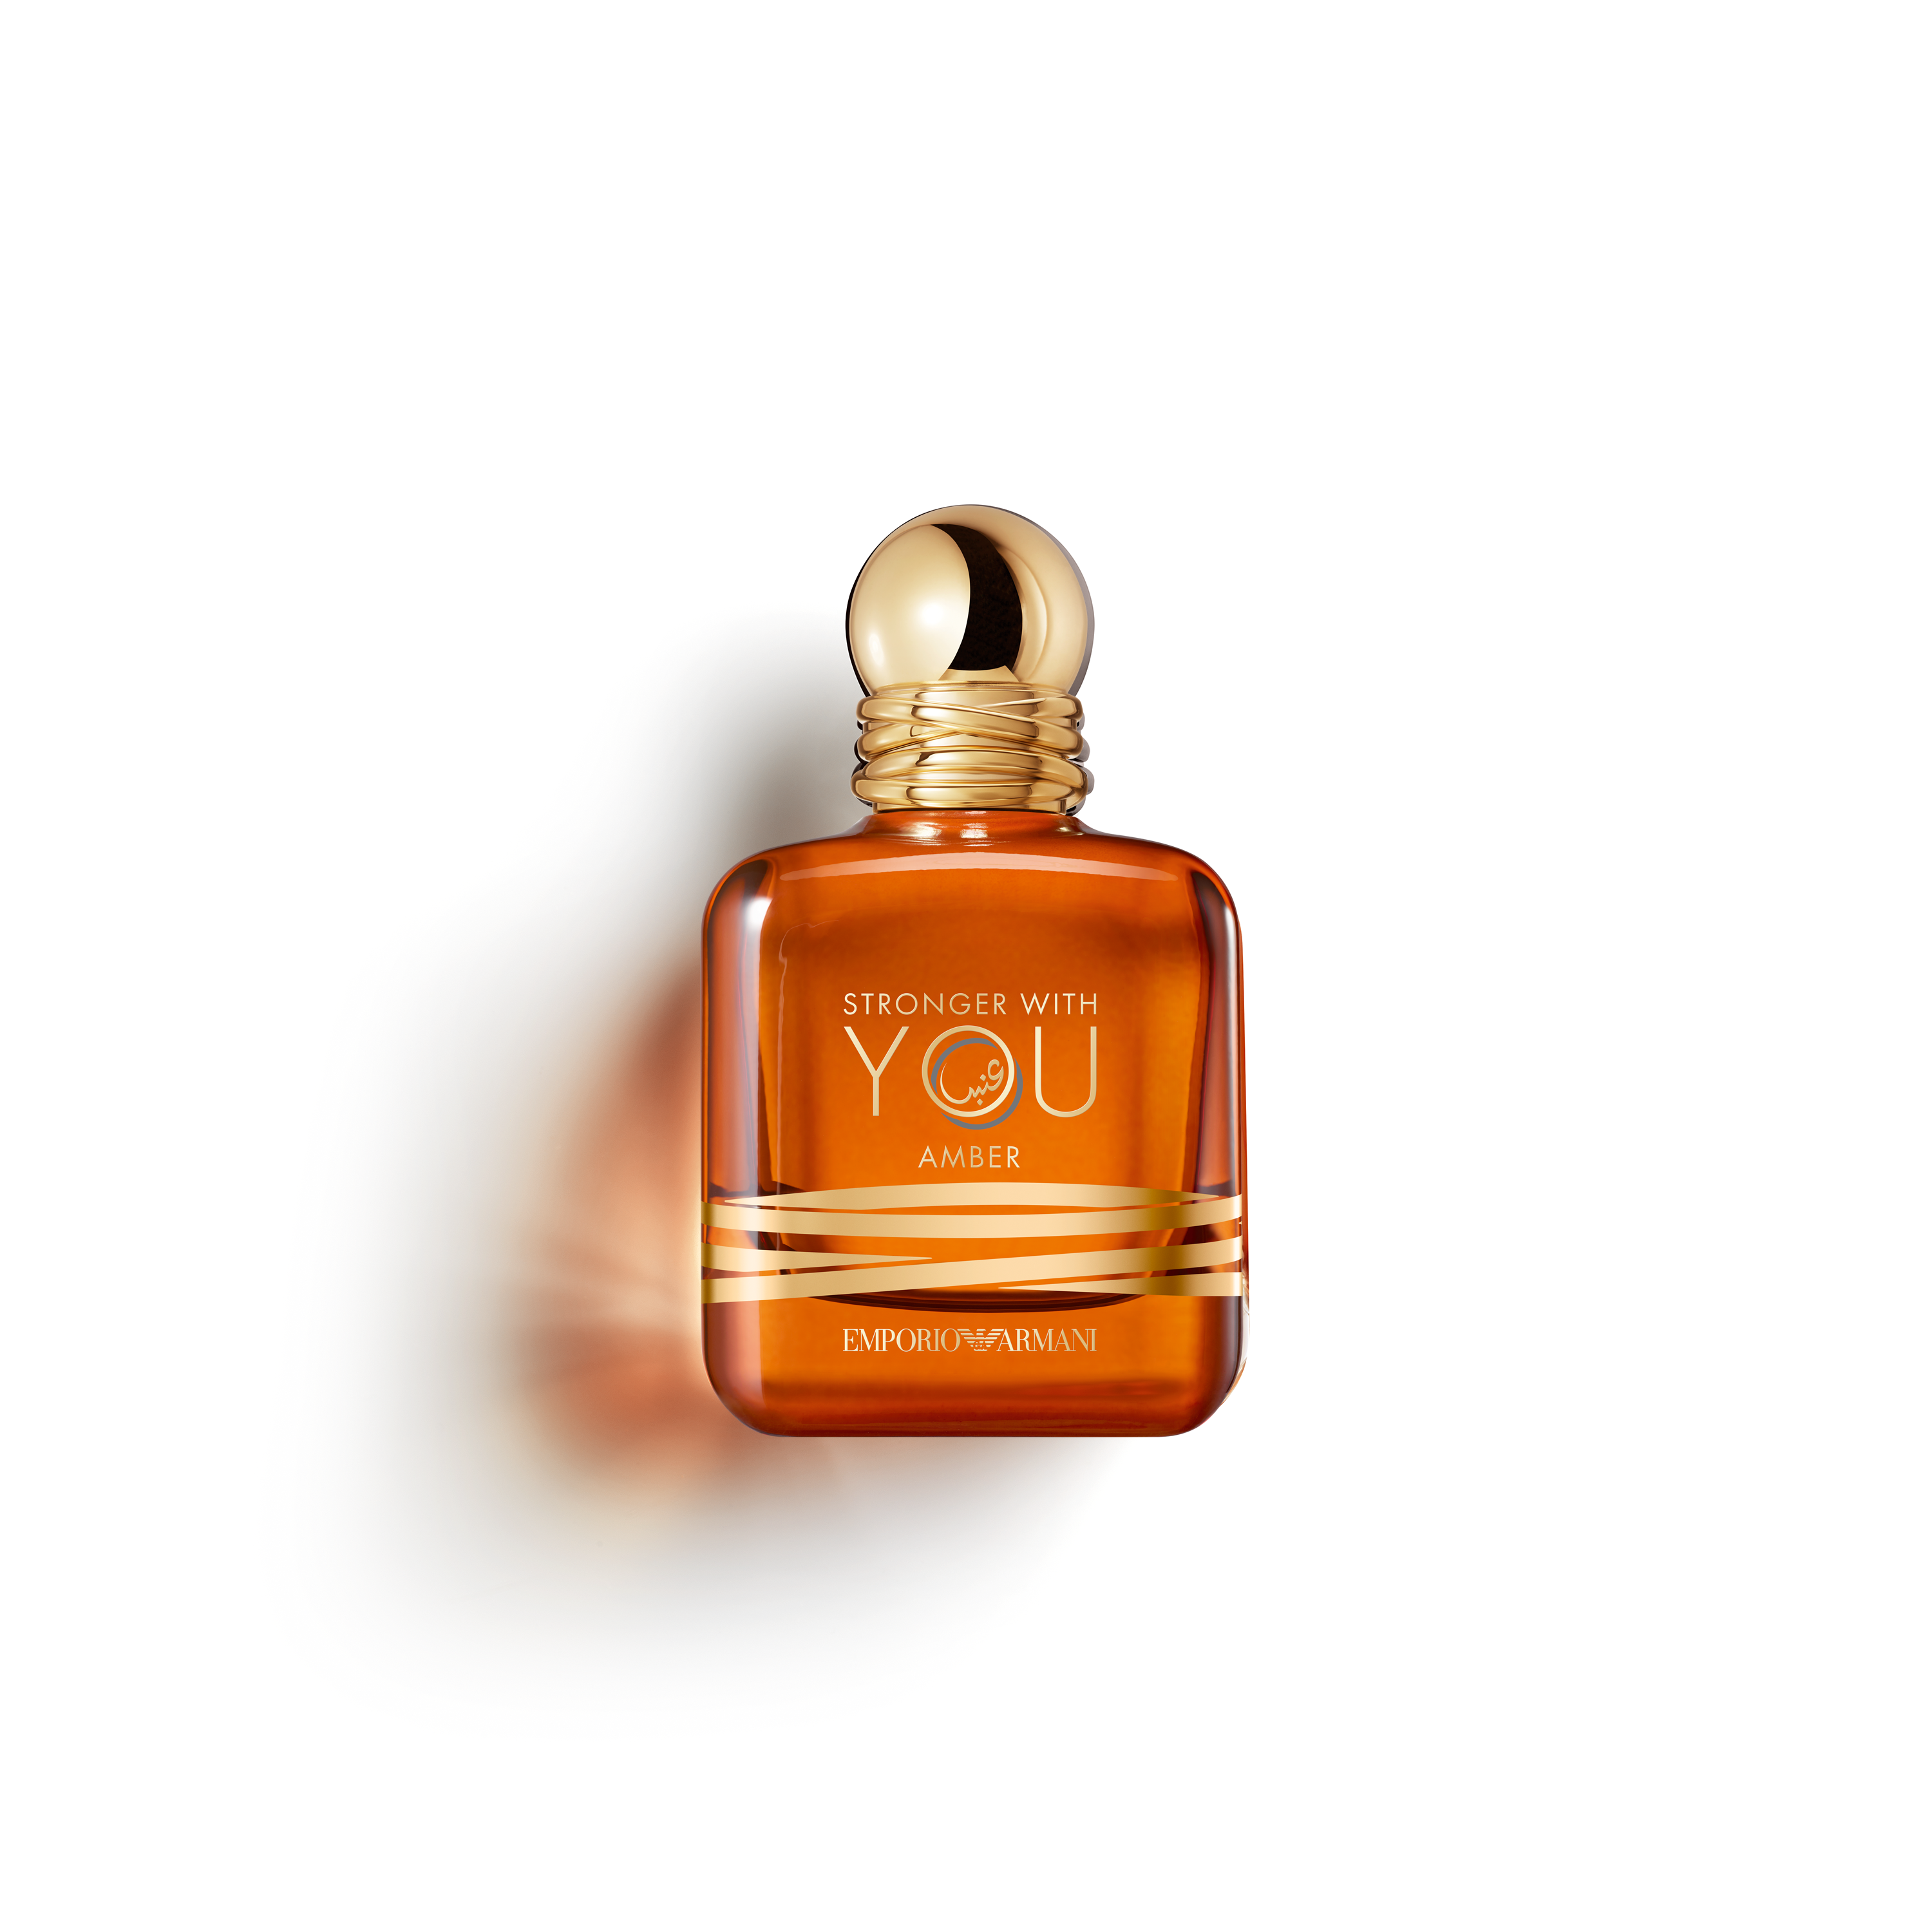 Armani Emporio Stronger With You Amber Edp 100ml